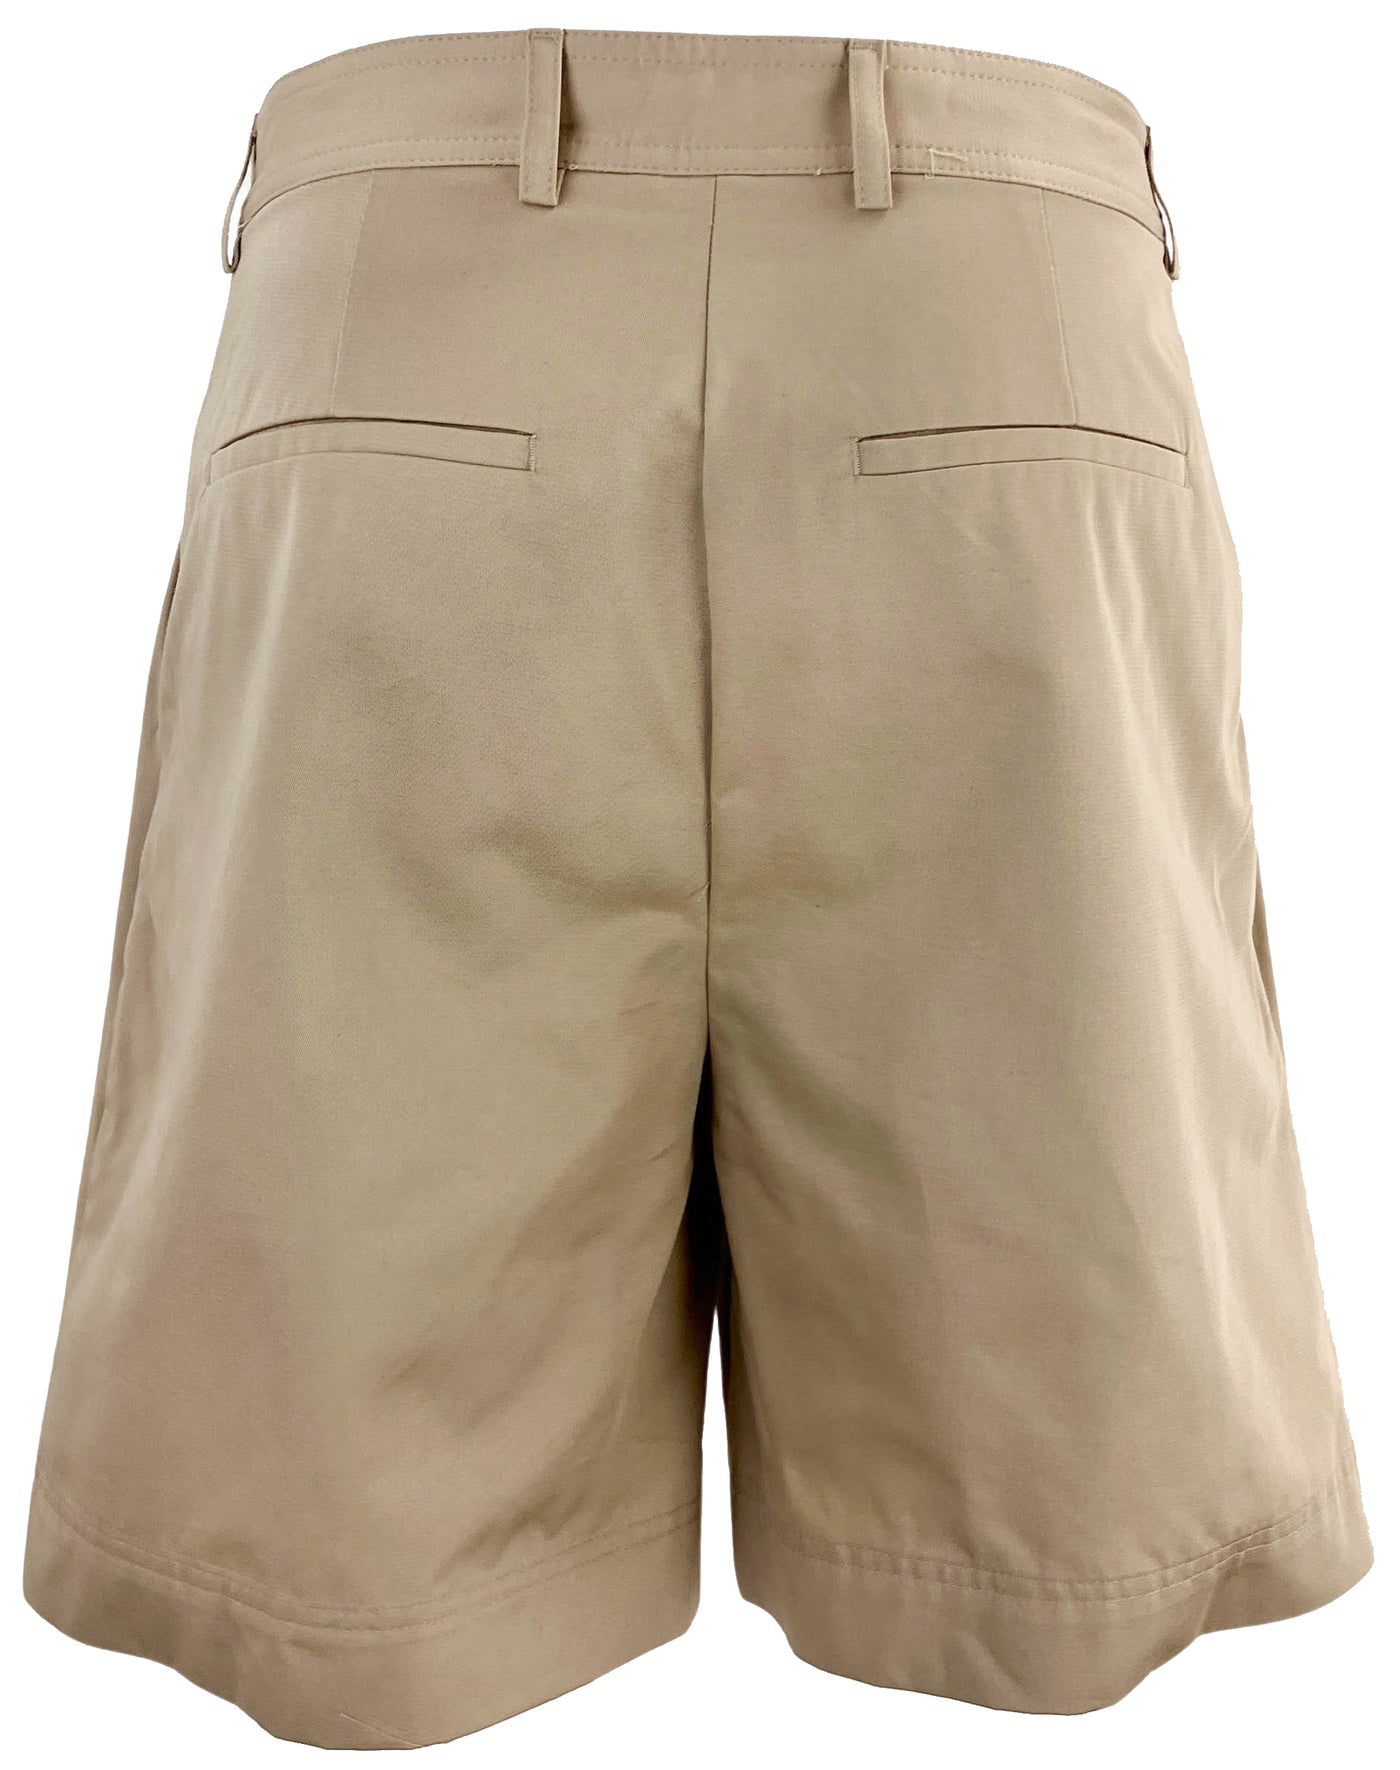 Toteme Pleated Shorts in Overcast Beige - Discounts on Totême at UAL